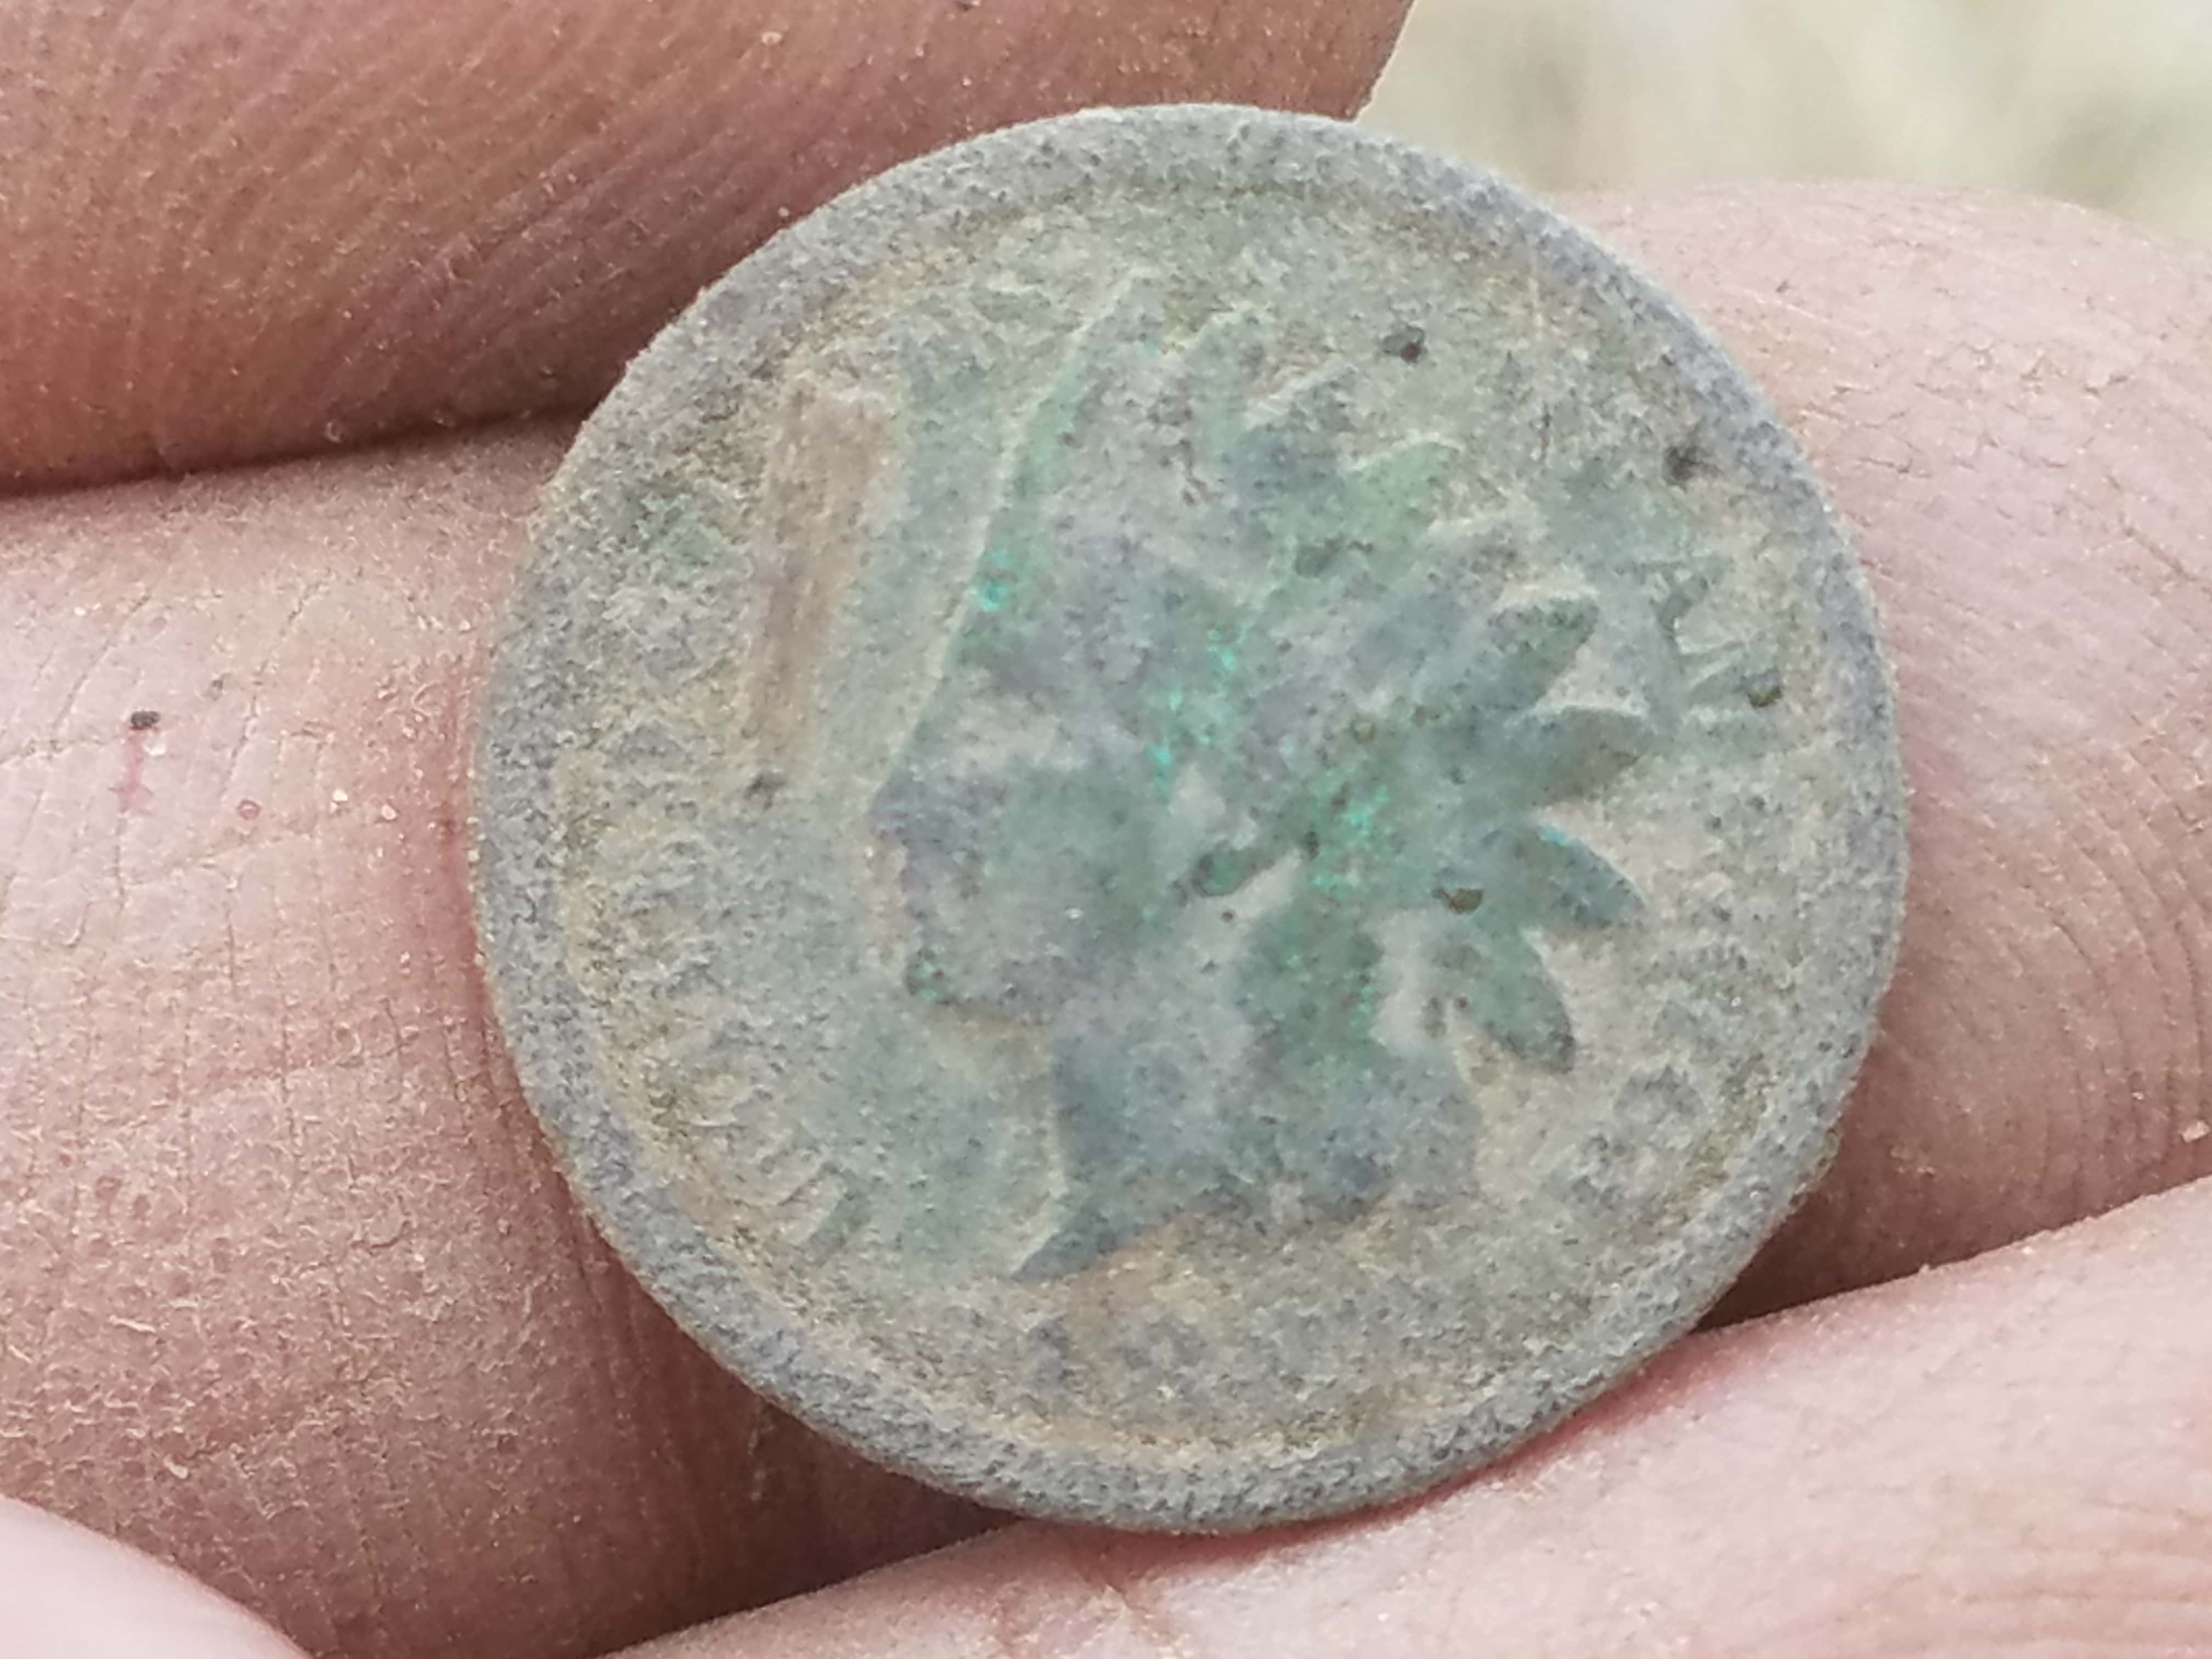 1852 Indian Head Penny found with Equinox 800